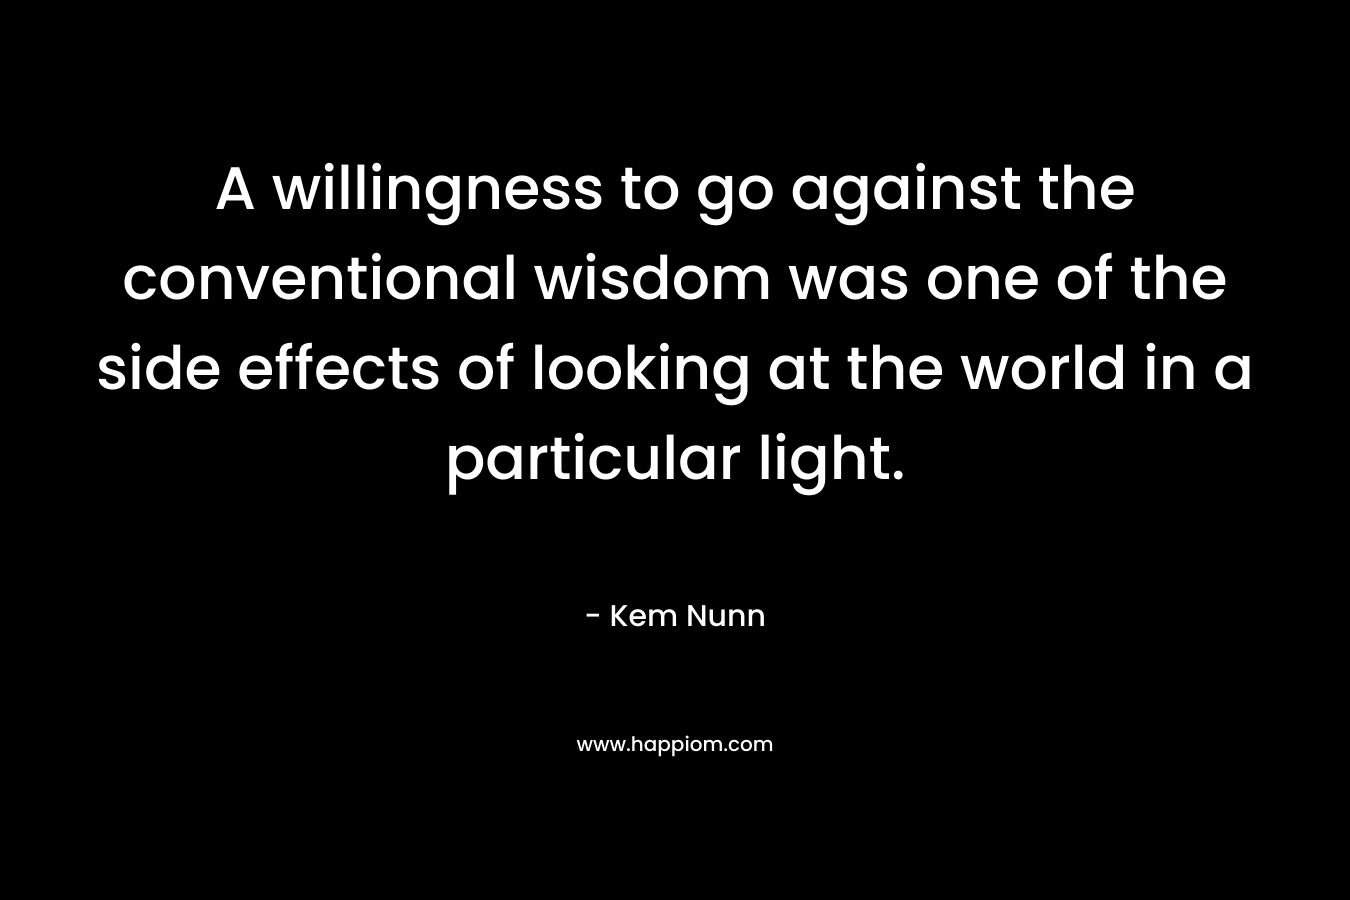 A willingness to go against the conventional wisdom was one of the side effects of looking at the world in a particular light. – Kem Nunn